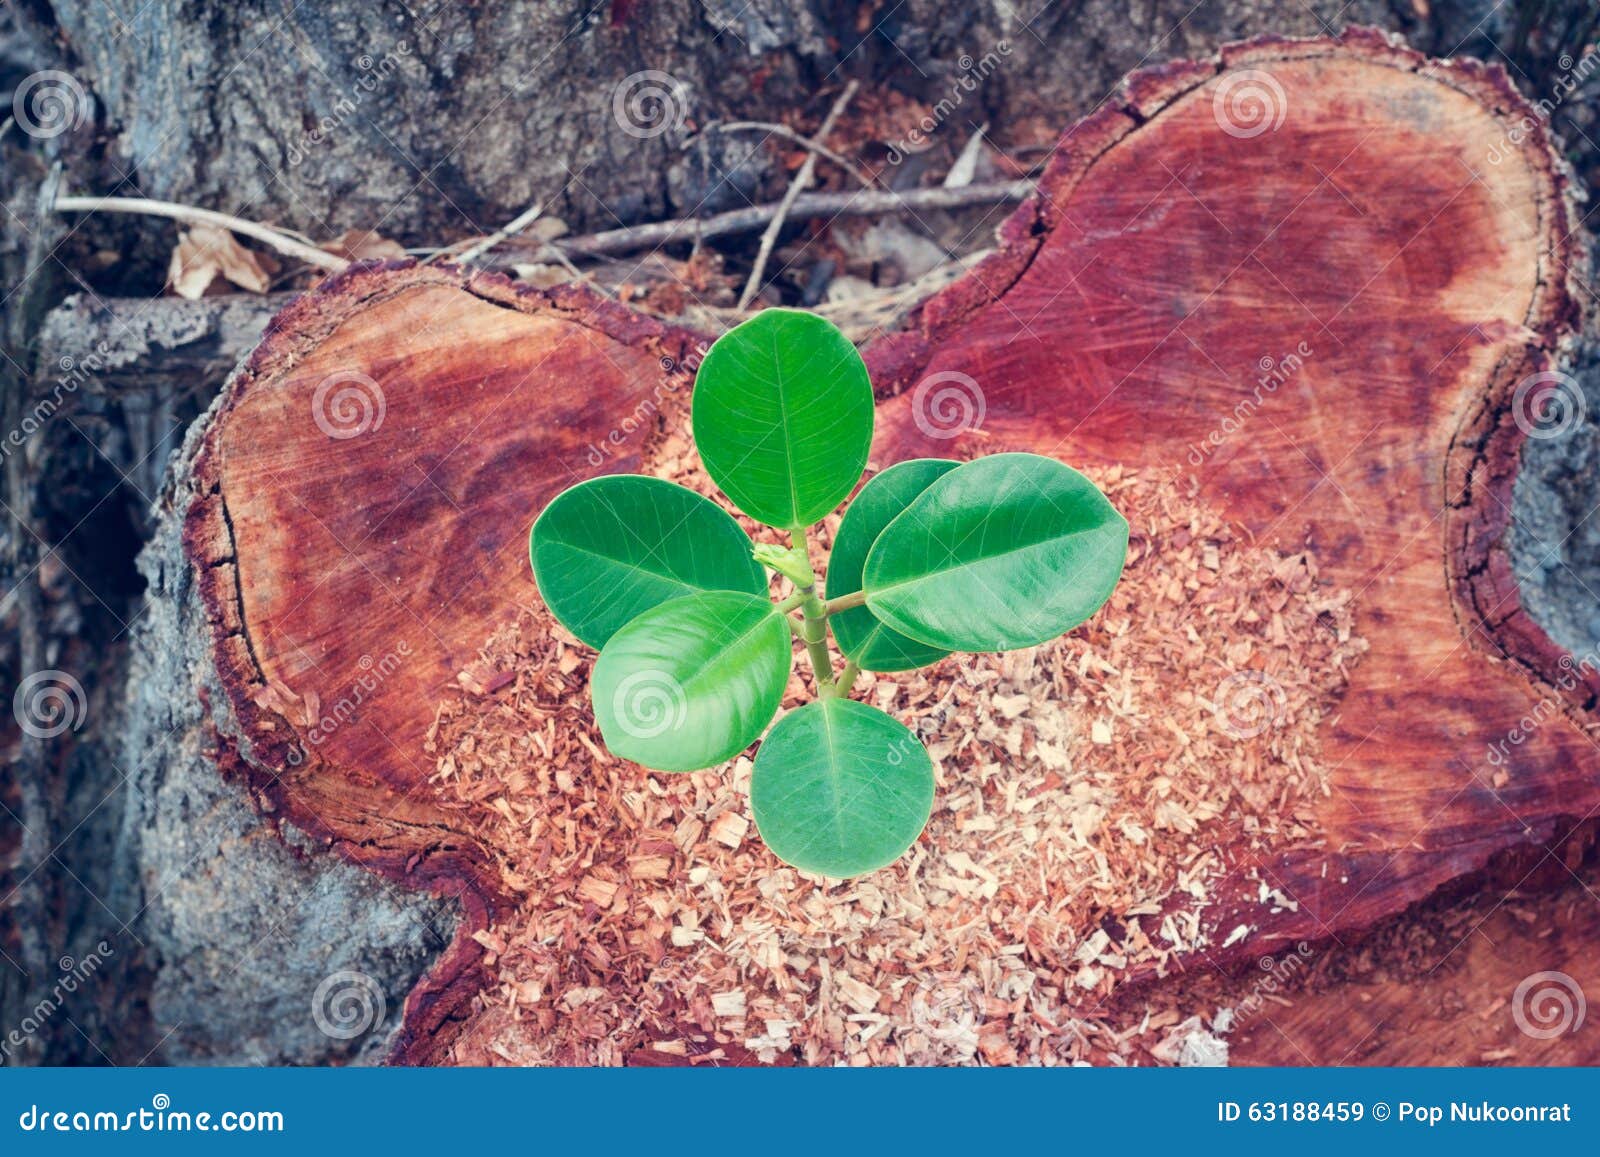 green plant growing on the bole of a tree cut off